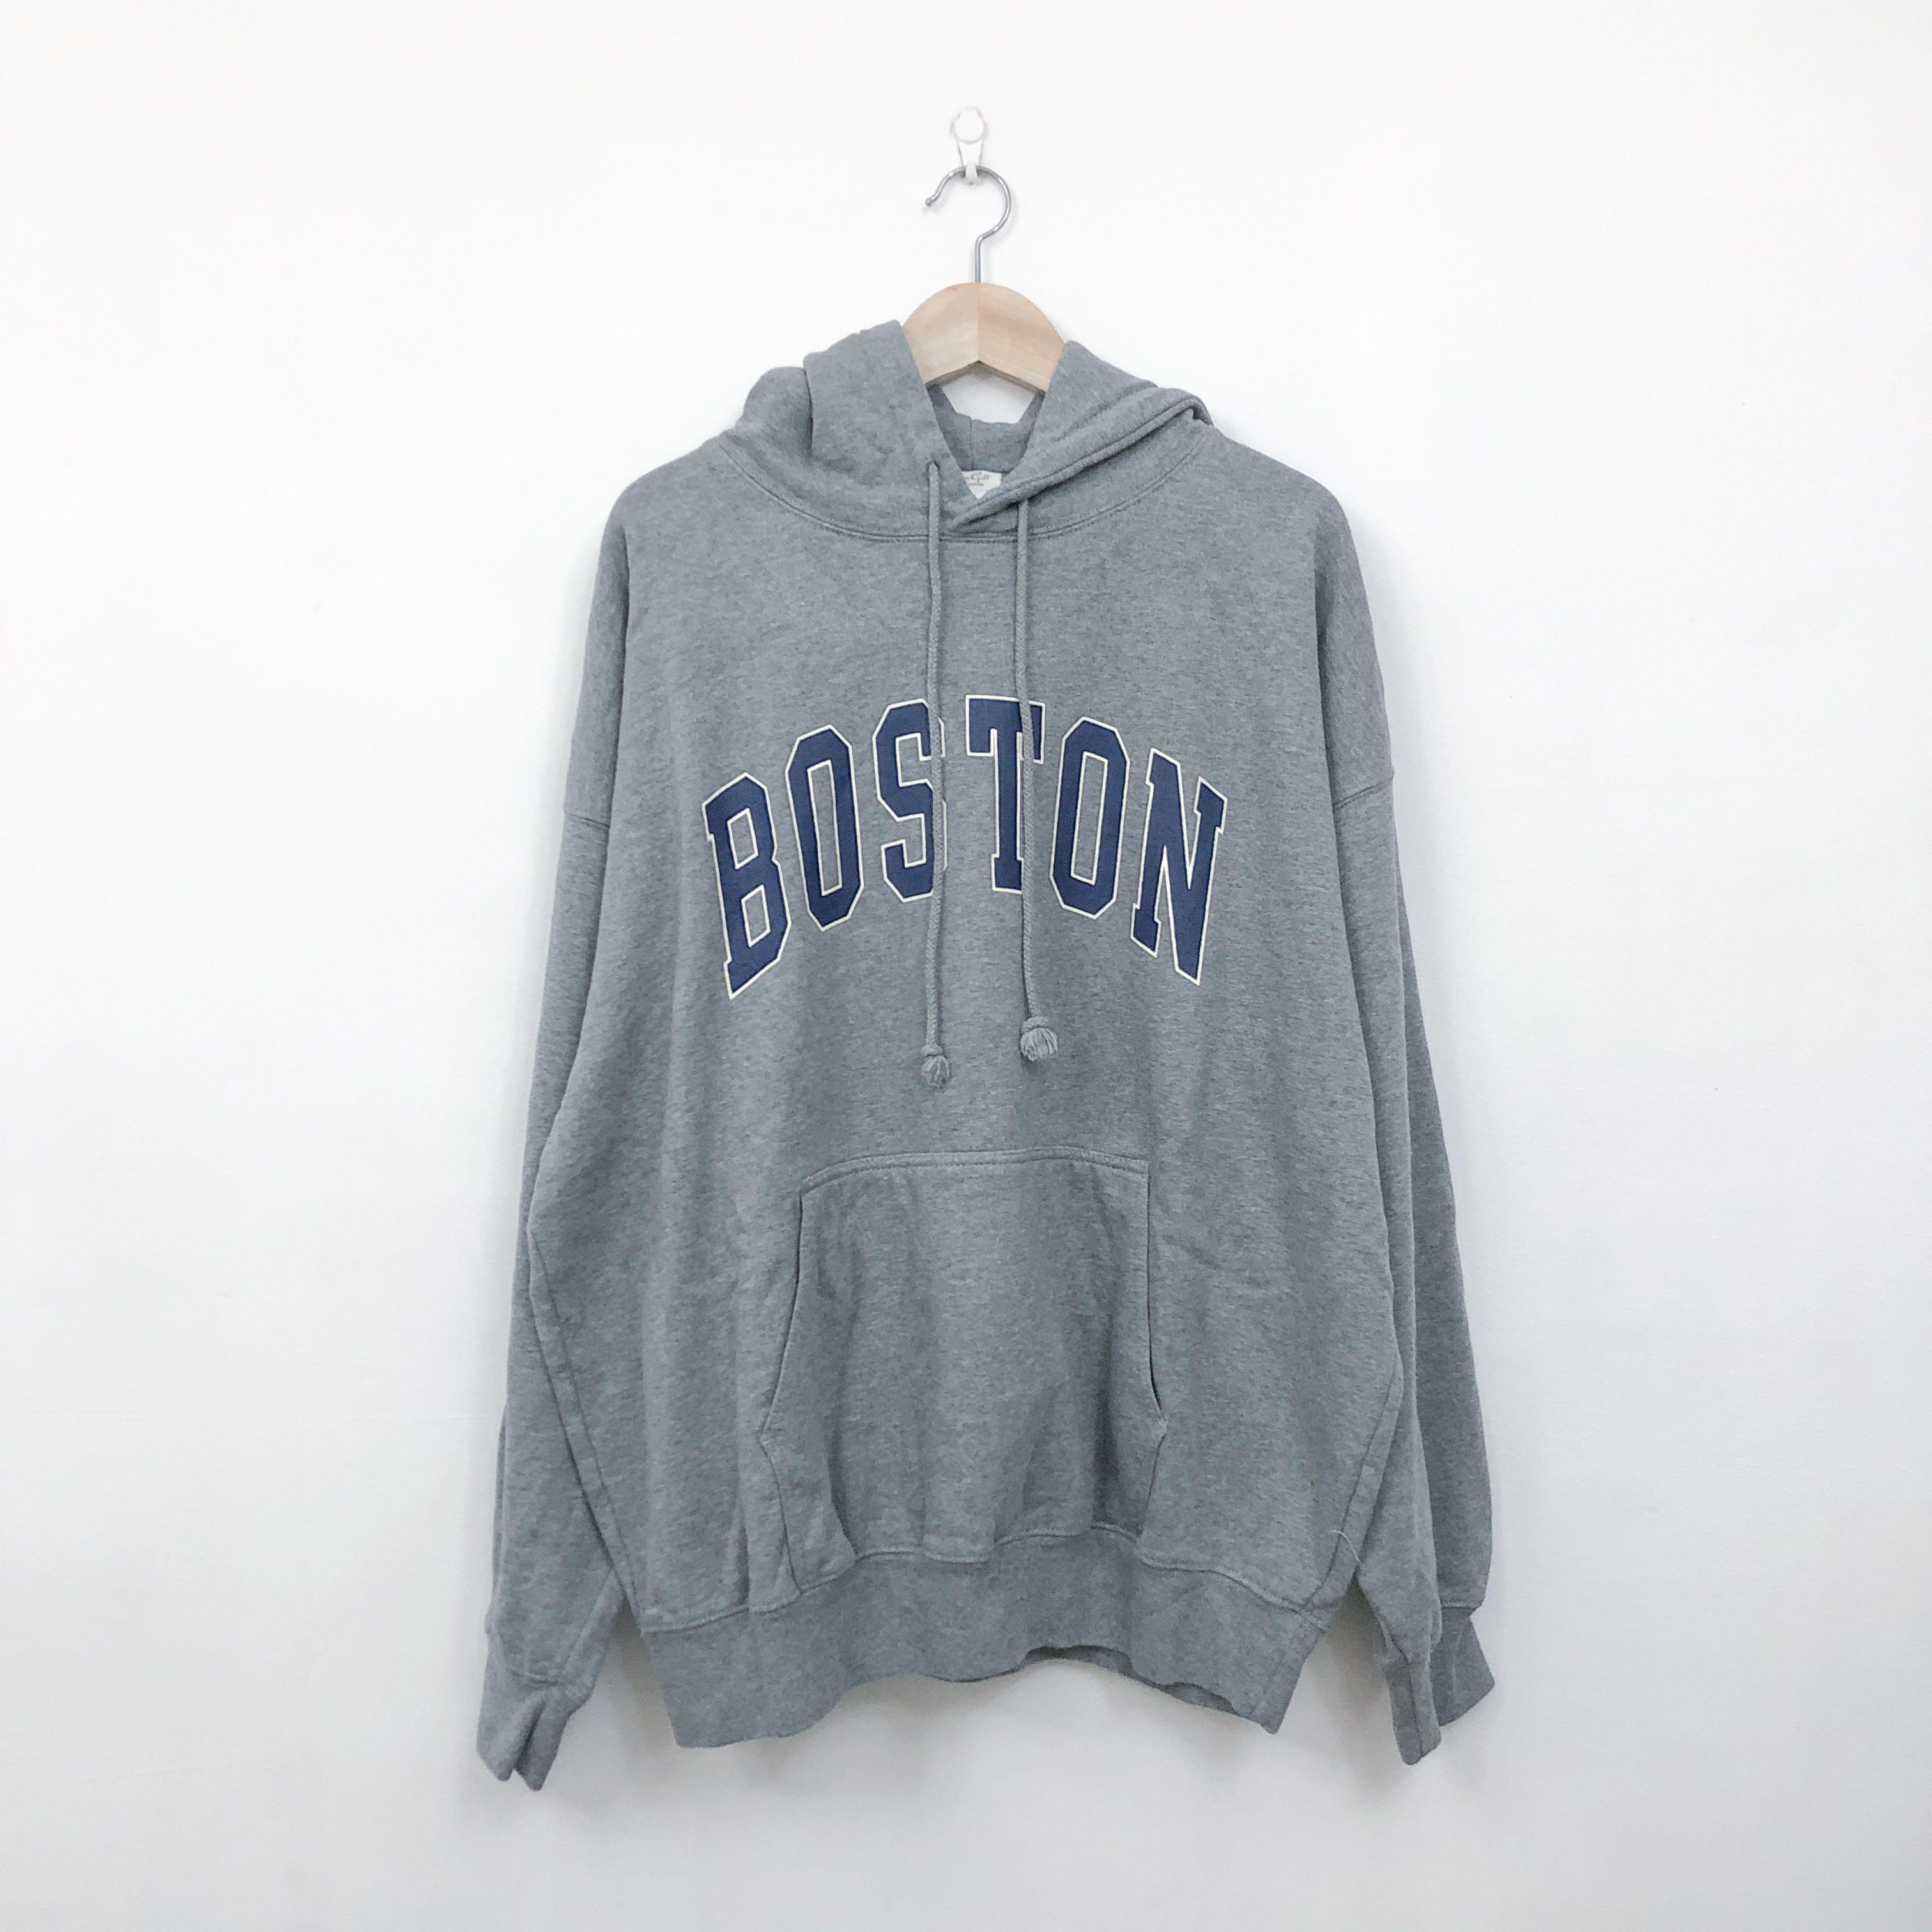 Christy Boston Hoodie  Brandy melville outfits hoodie, Brandy hoodie, Brandy  hoodies